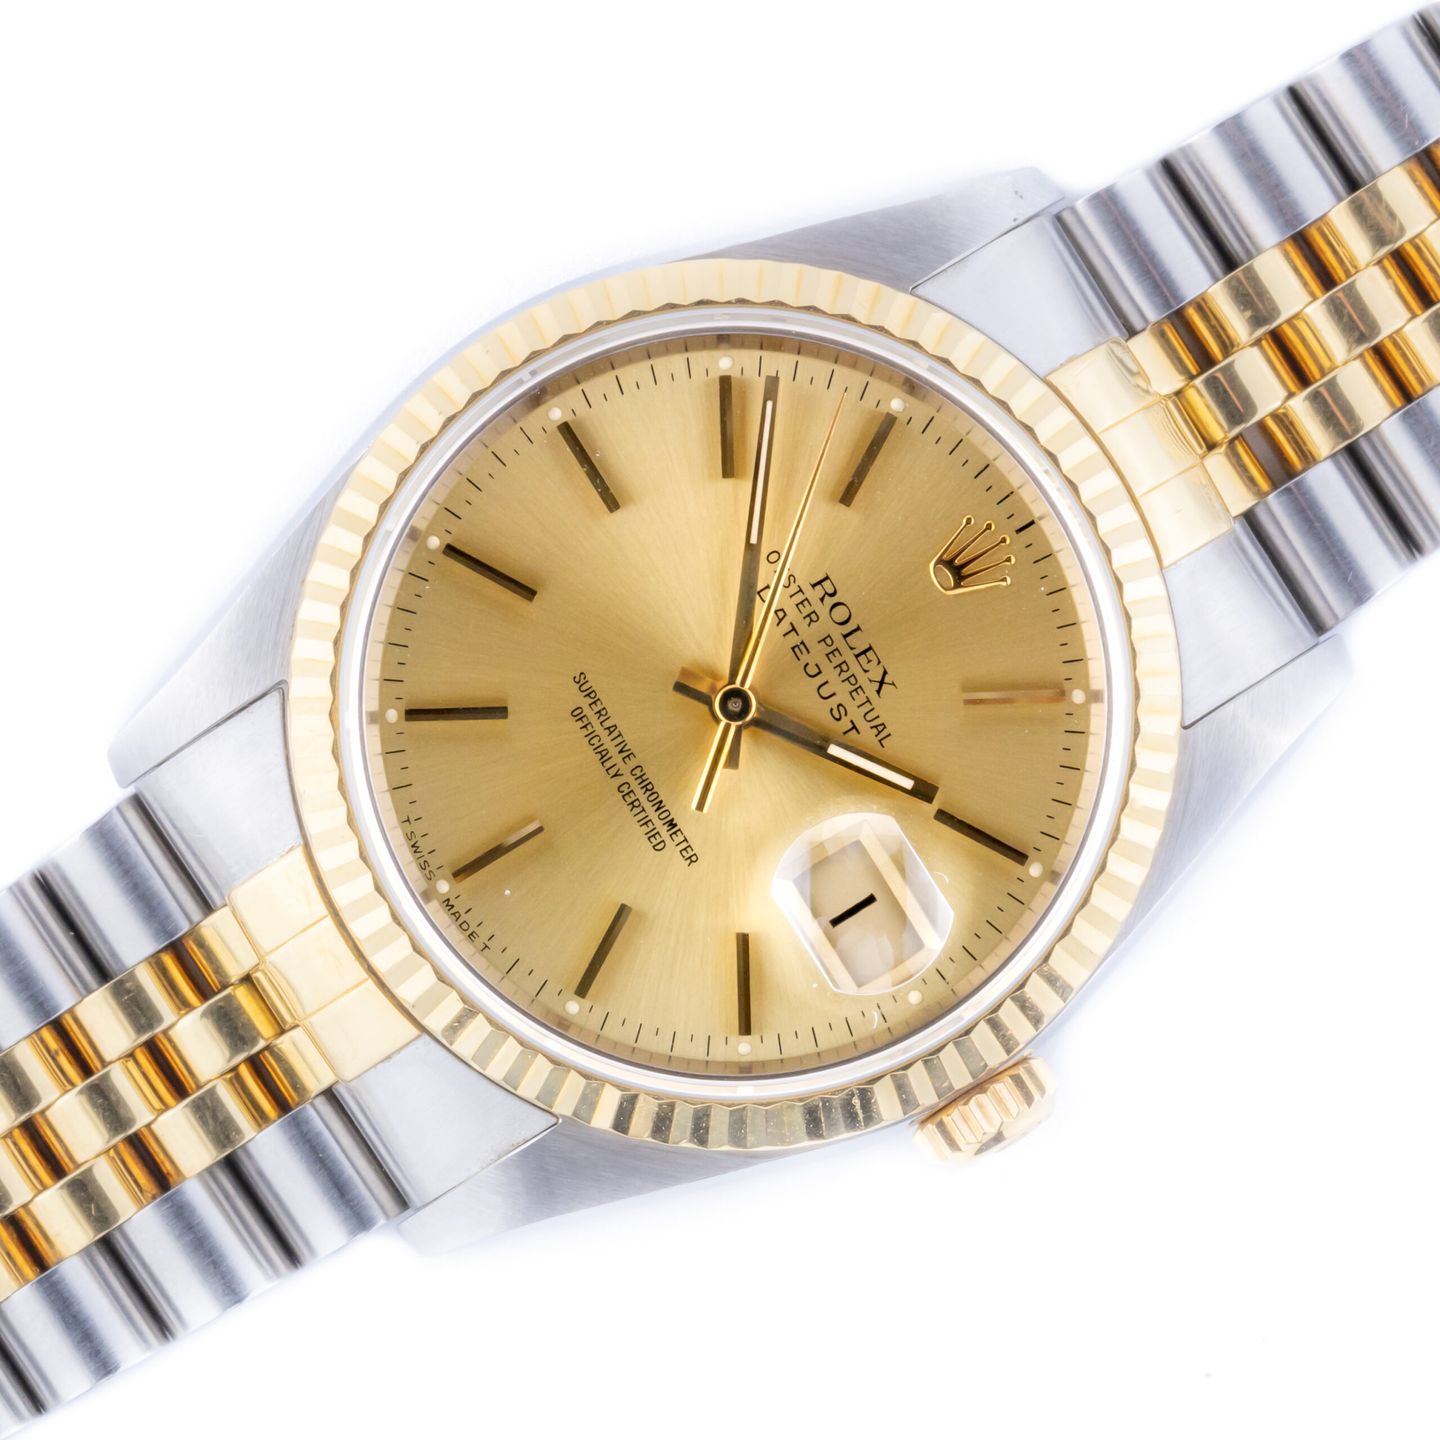 Rolex Datejust 36 16233 (1990) - Champagne dial 36 mm Gold/Steel case (1/5)